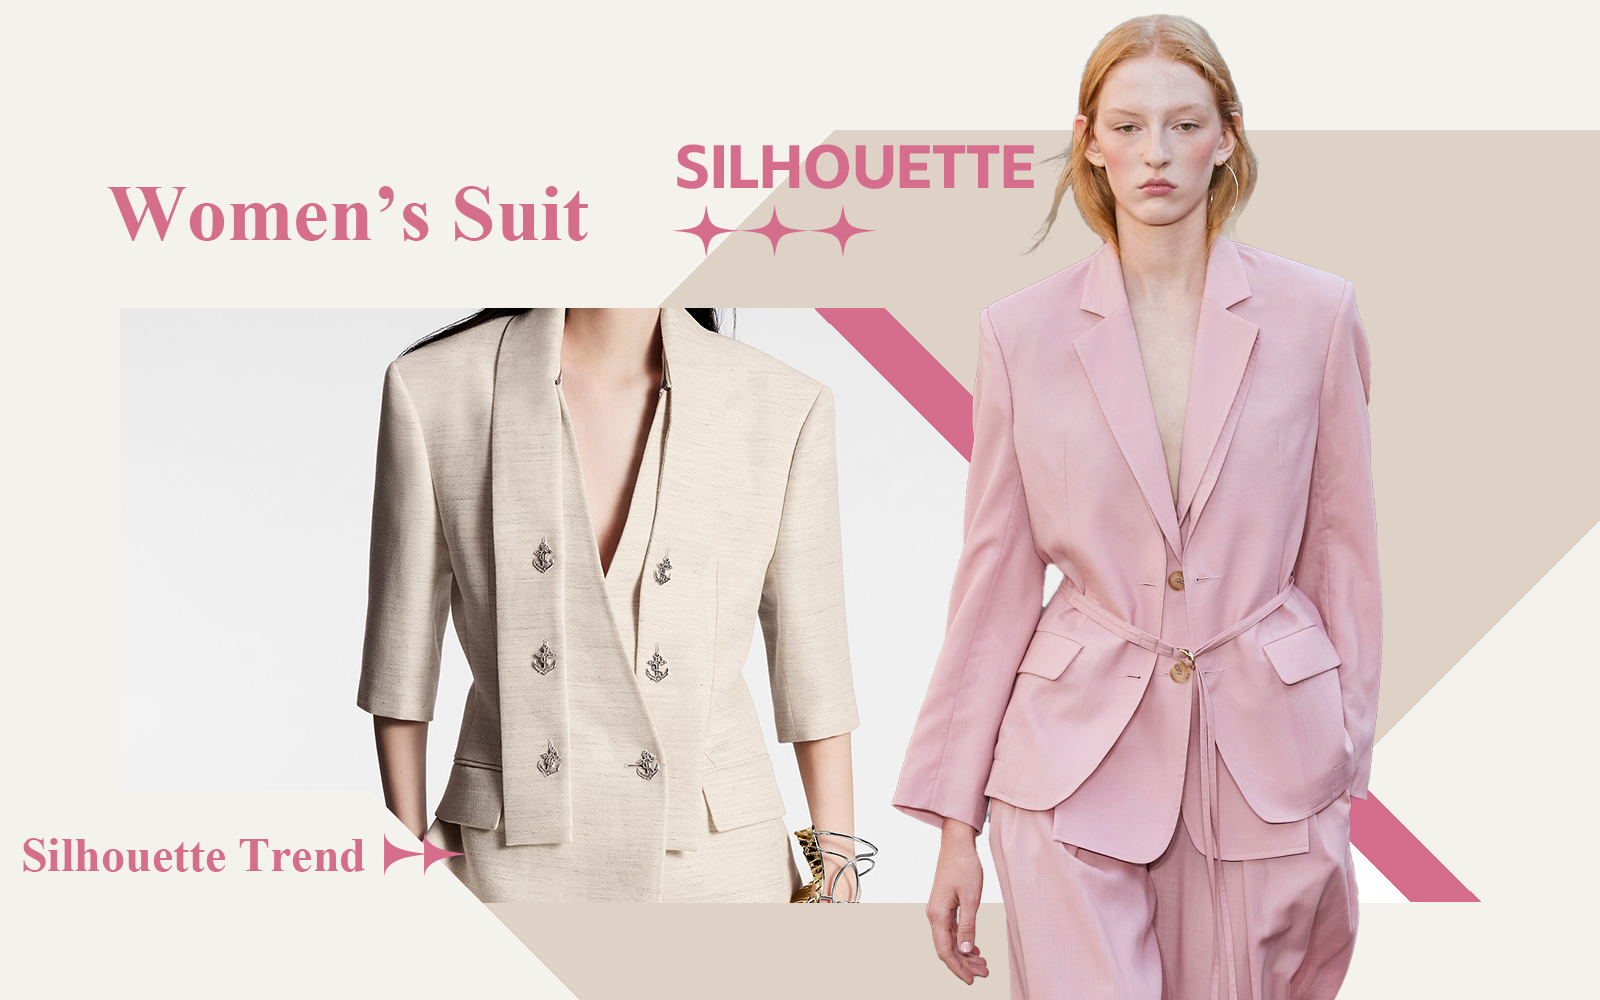 Elegant Commuting -- The Silhouette Trend for Women's Suit